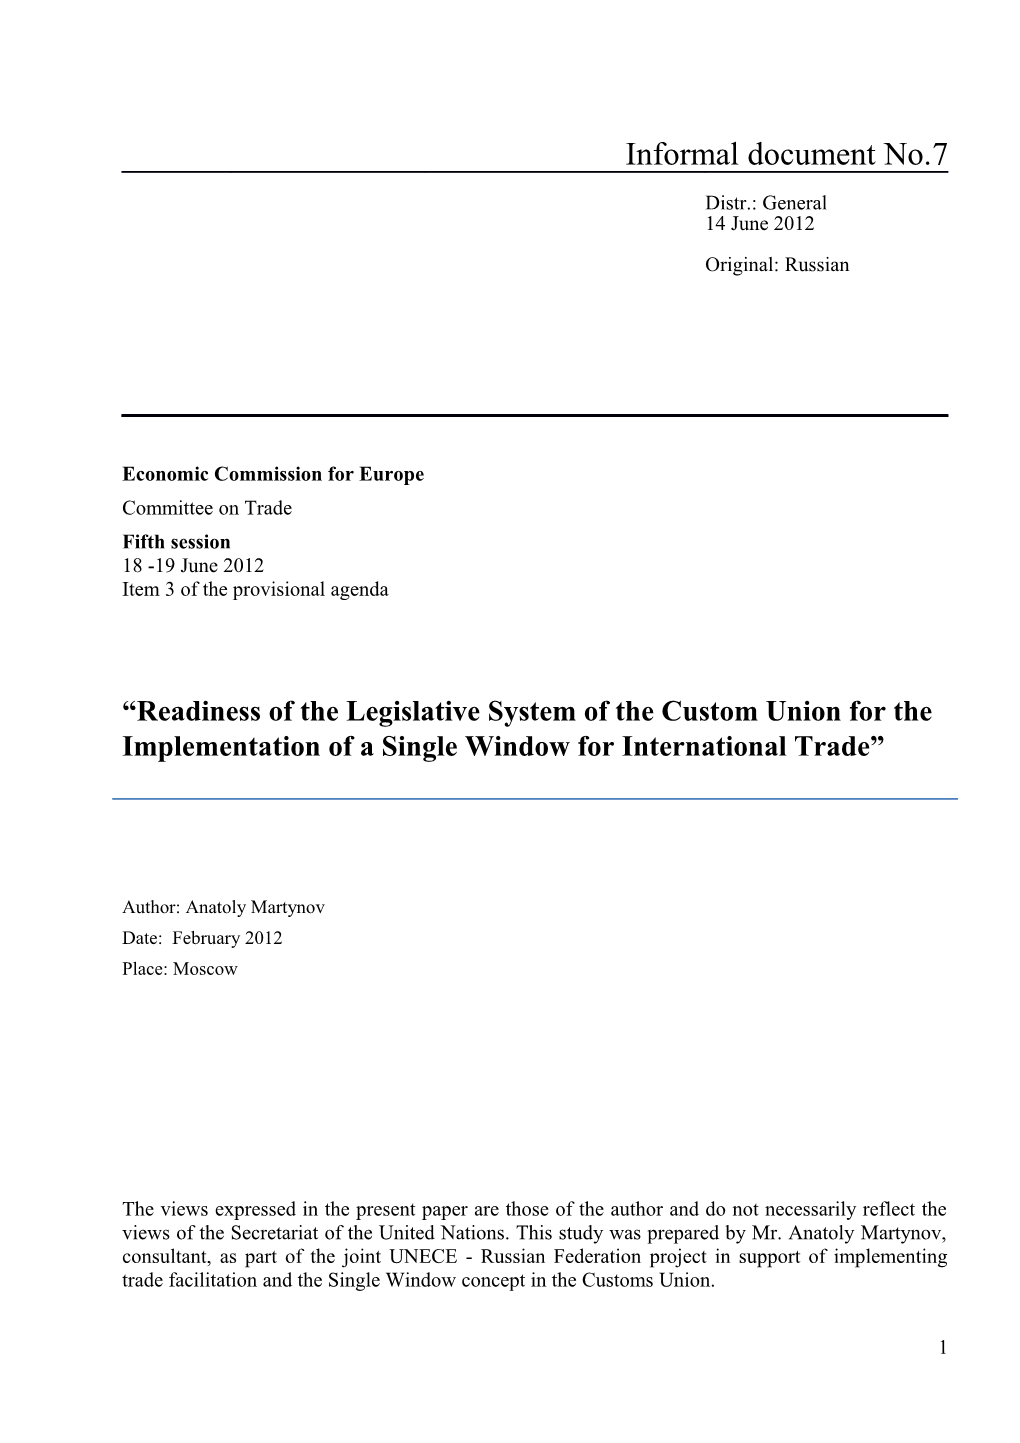 Structure and Organization of the Single Window Mechanism in the Customs Union